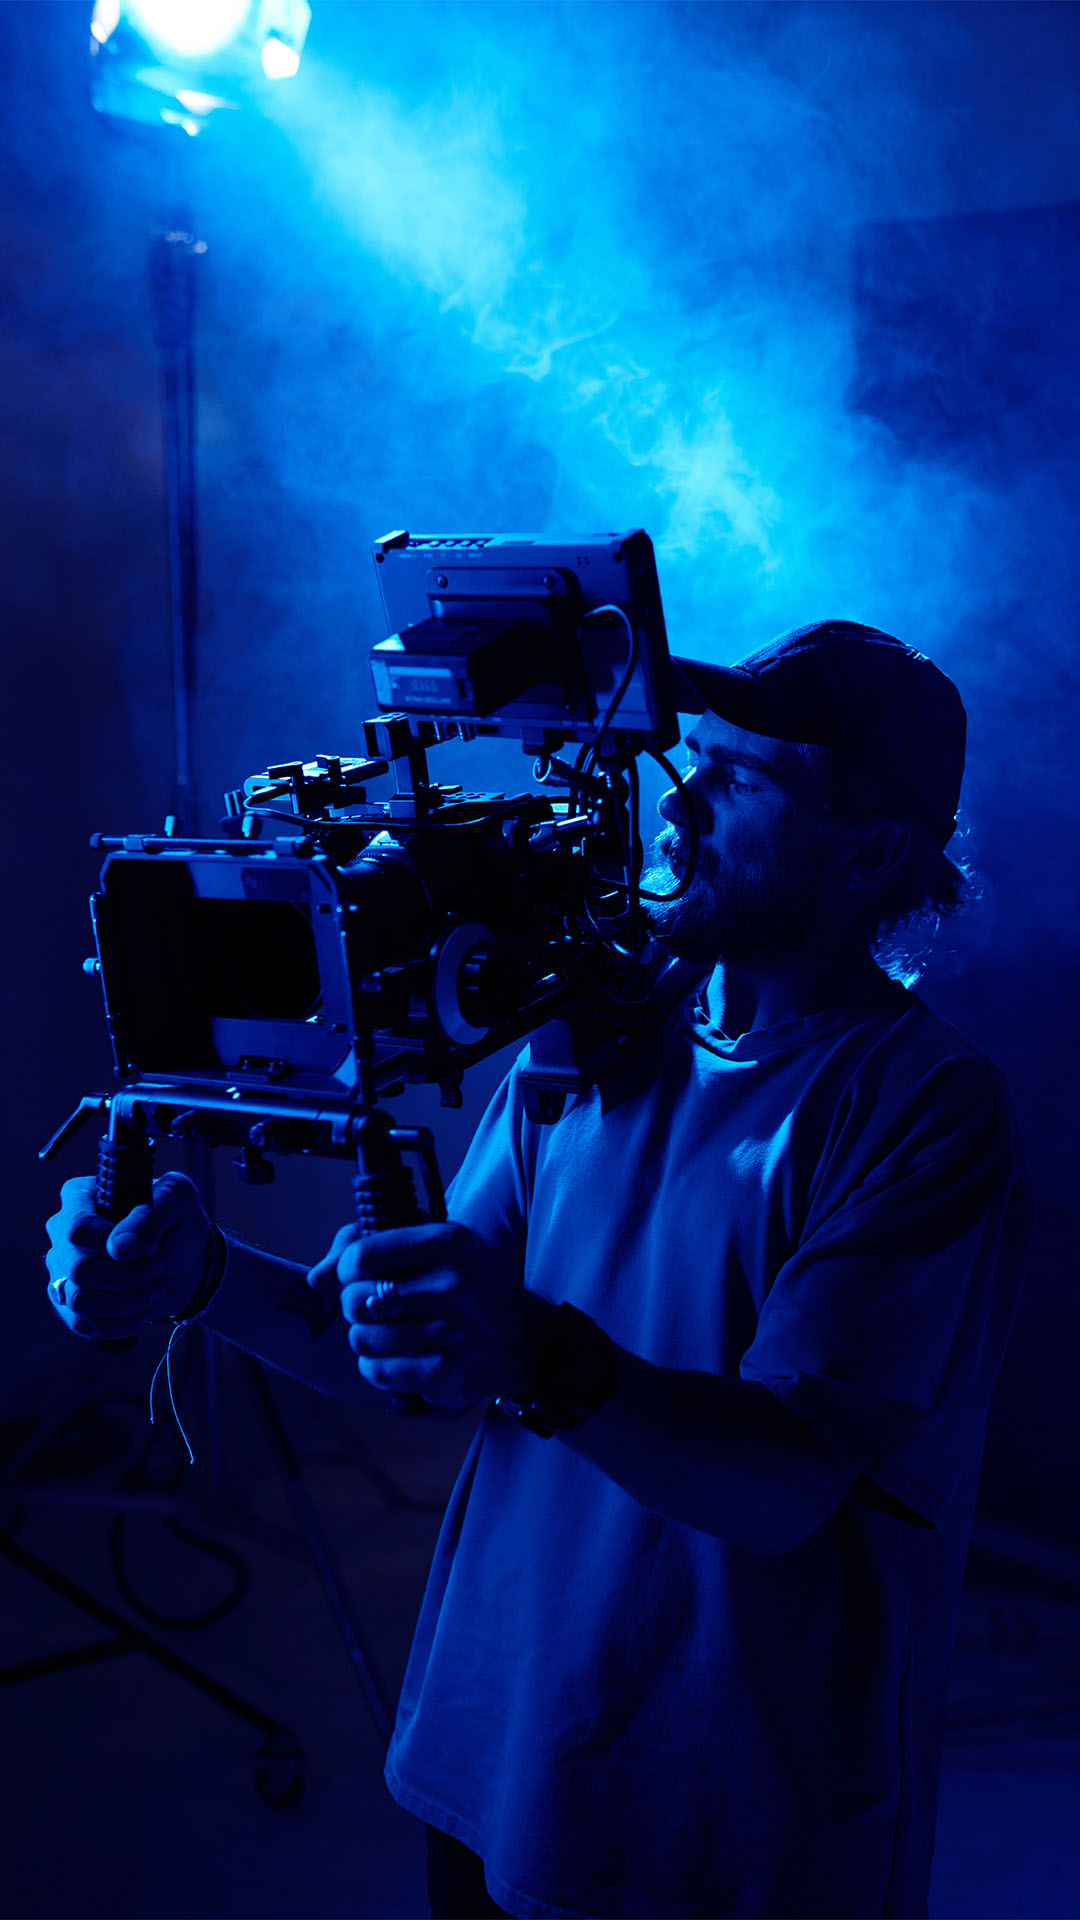 Are you a budding filmmaker?